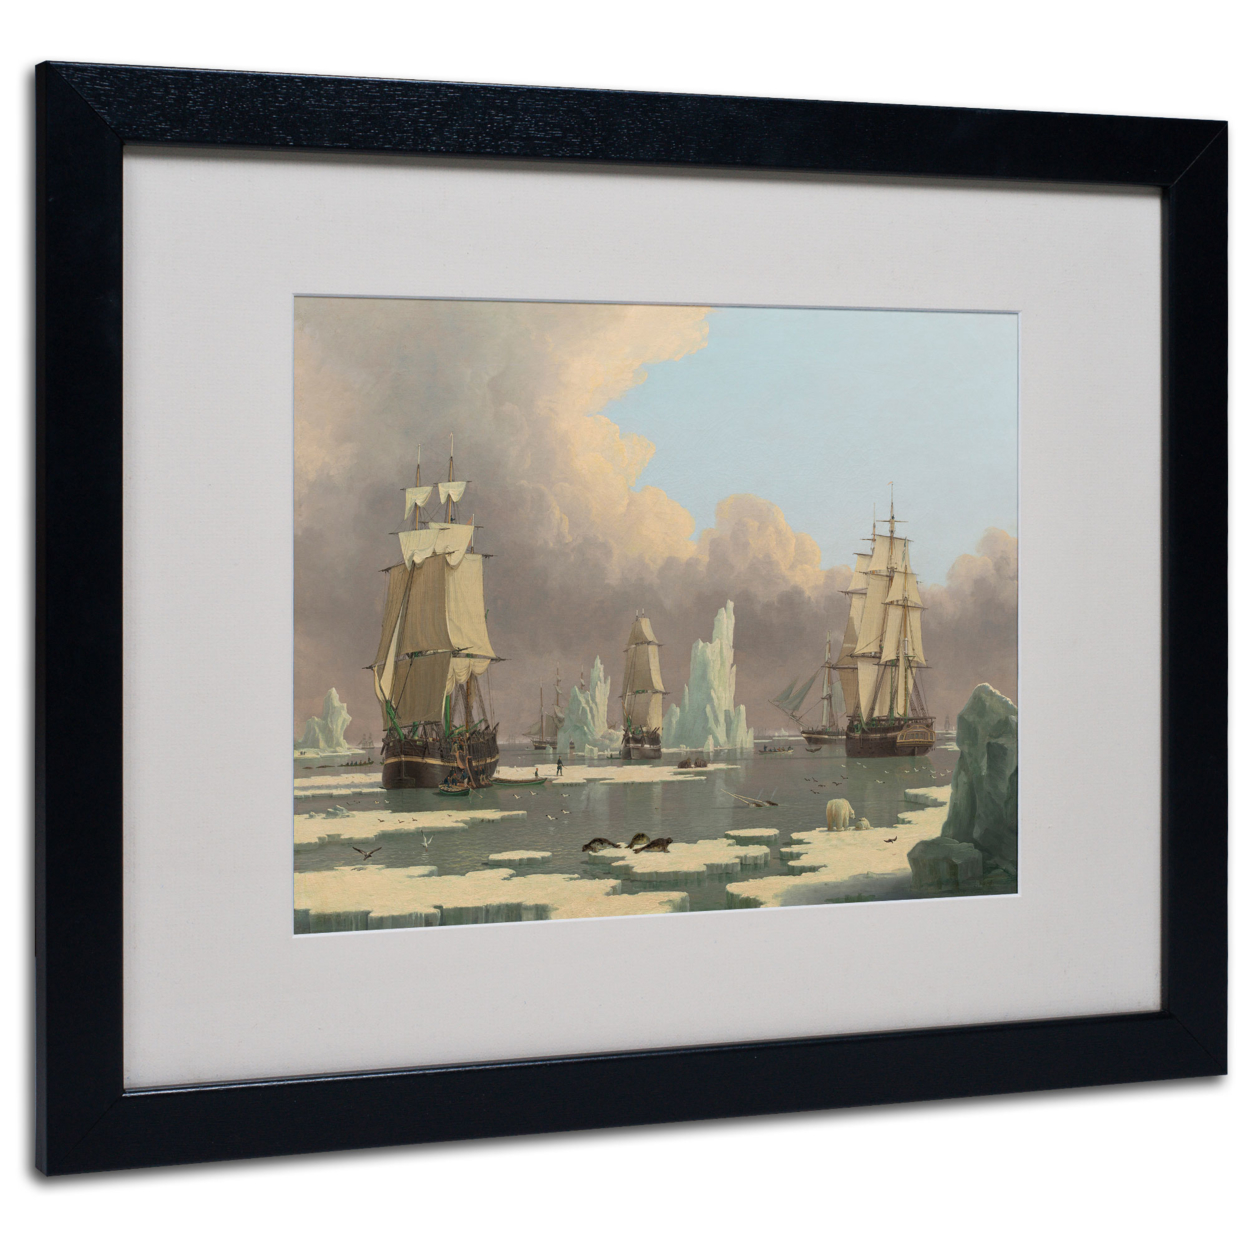 John Ward 'The Northern Whale Fishery' Black Wooden Framed Art 18 X 22 Inches